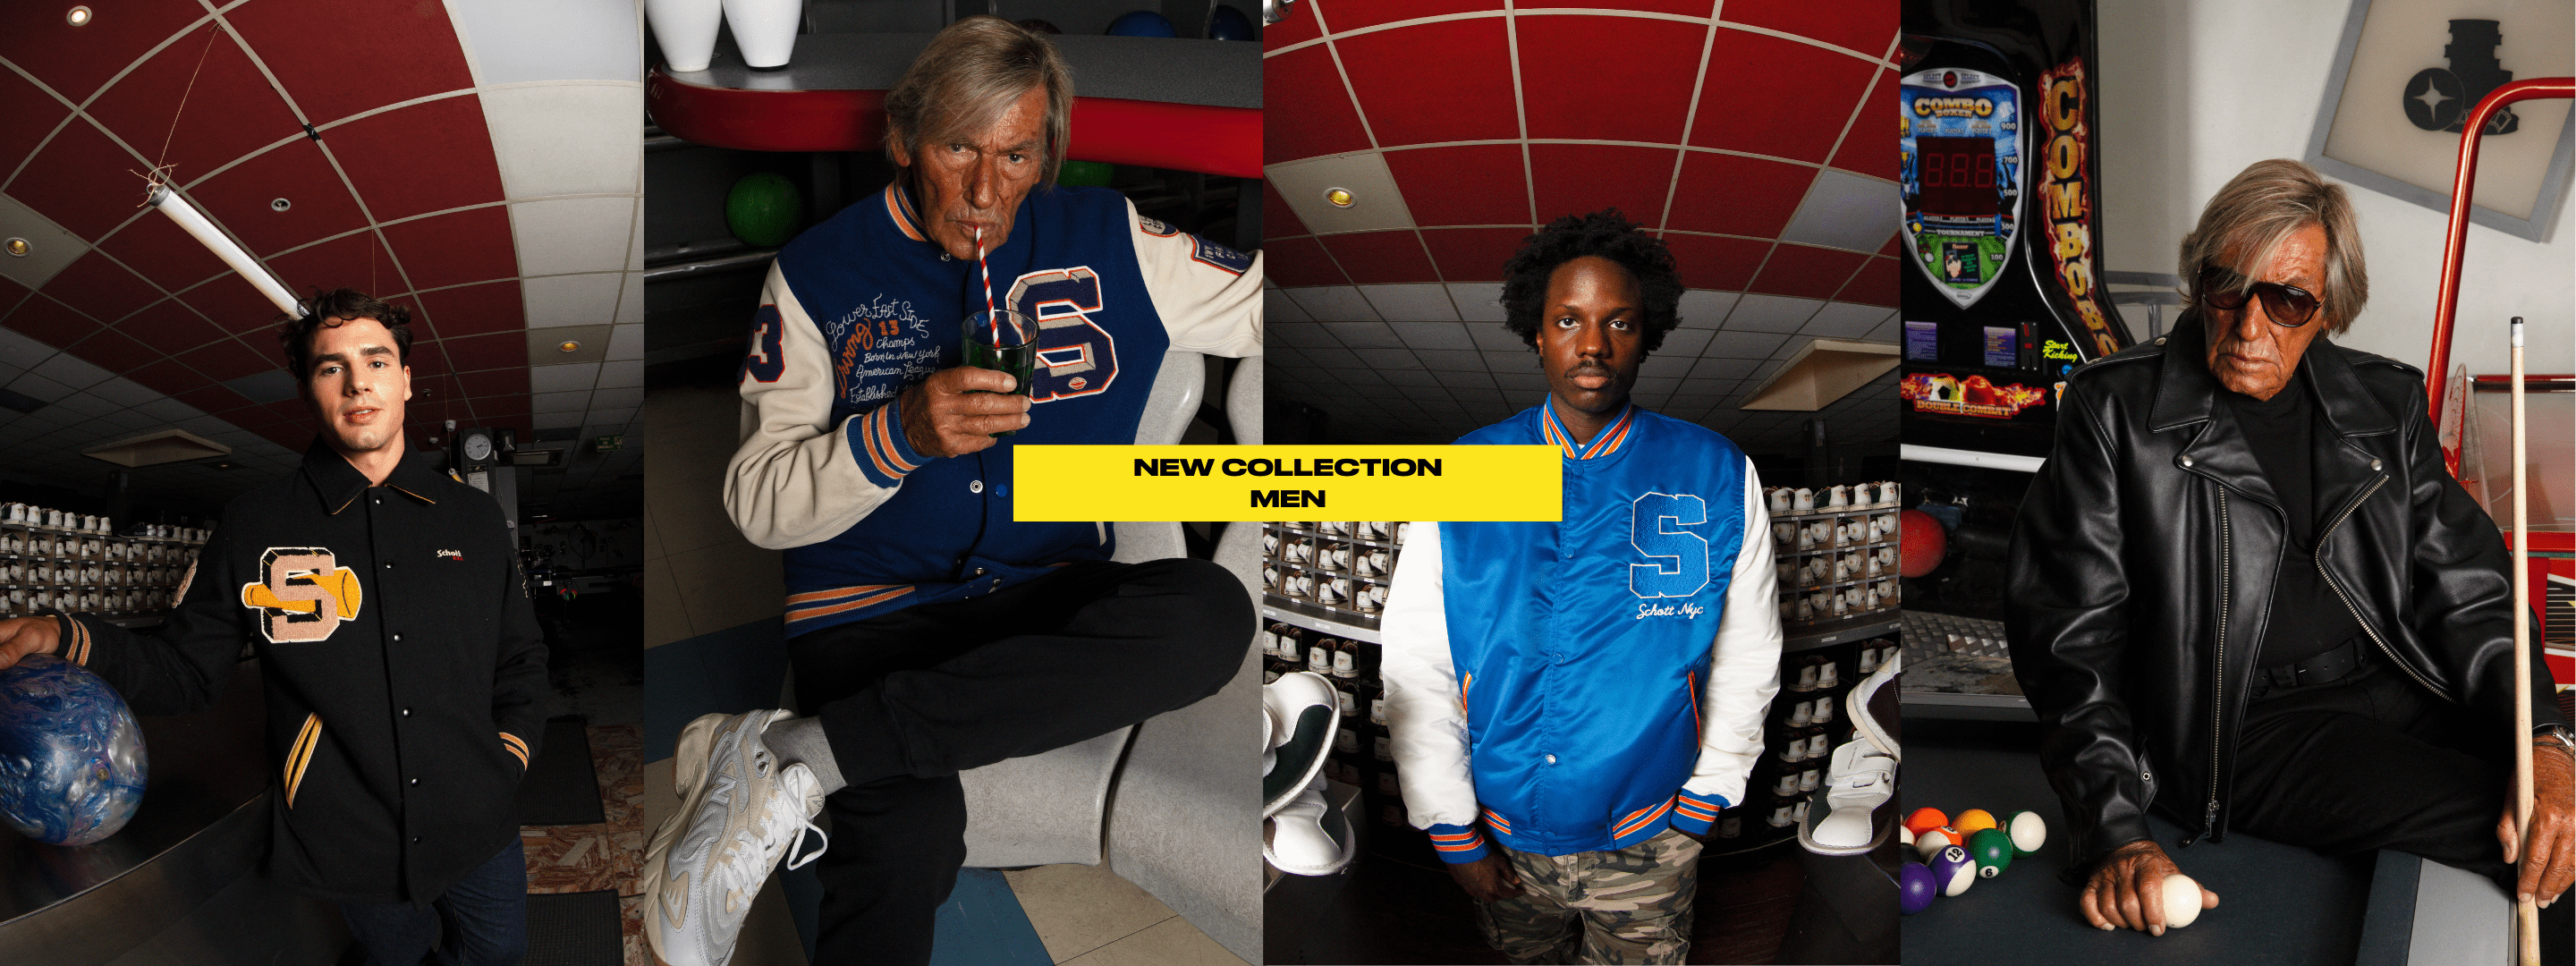 New Men's Collection